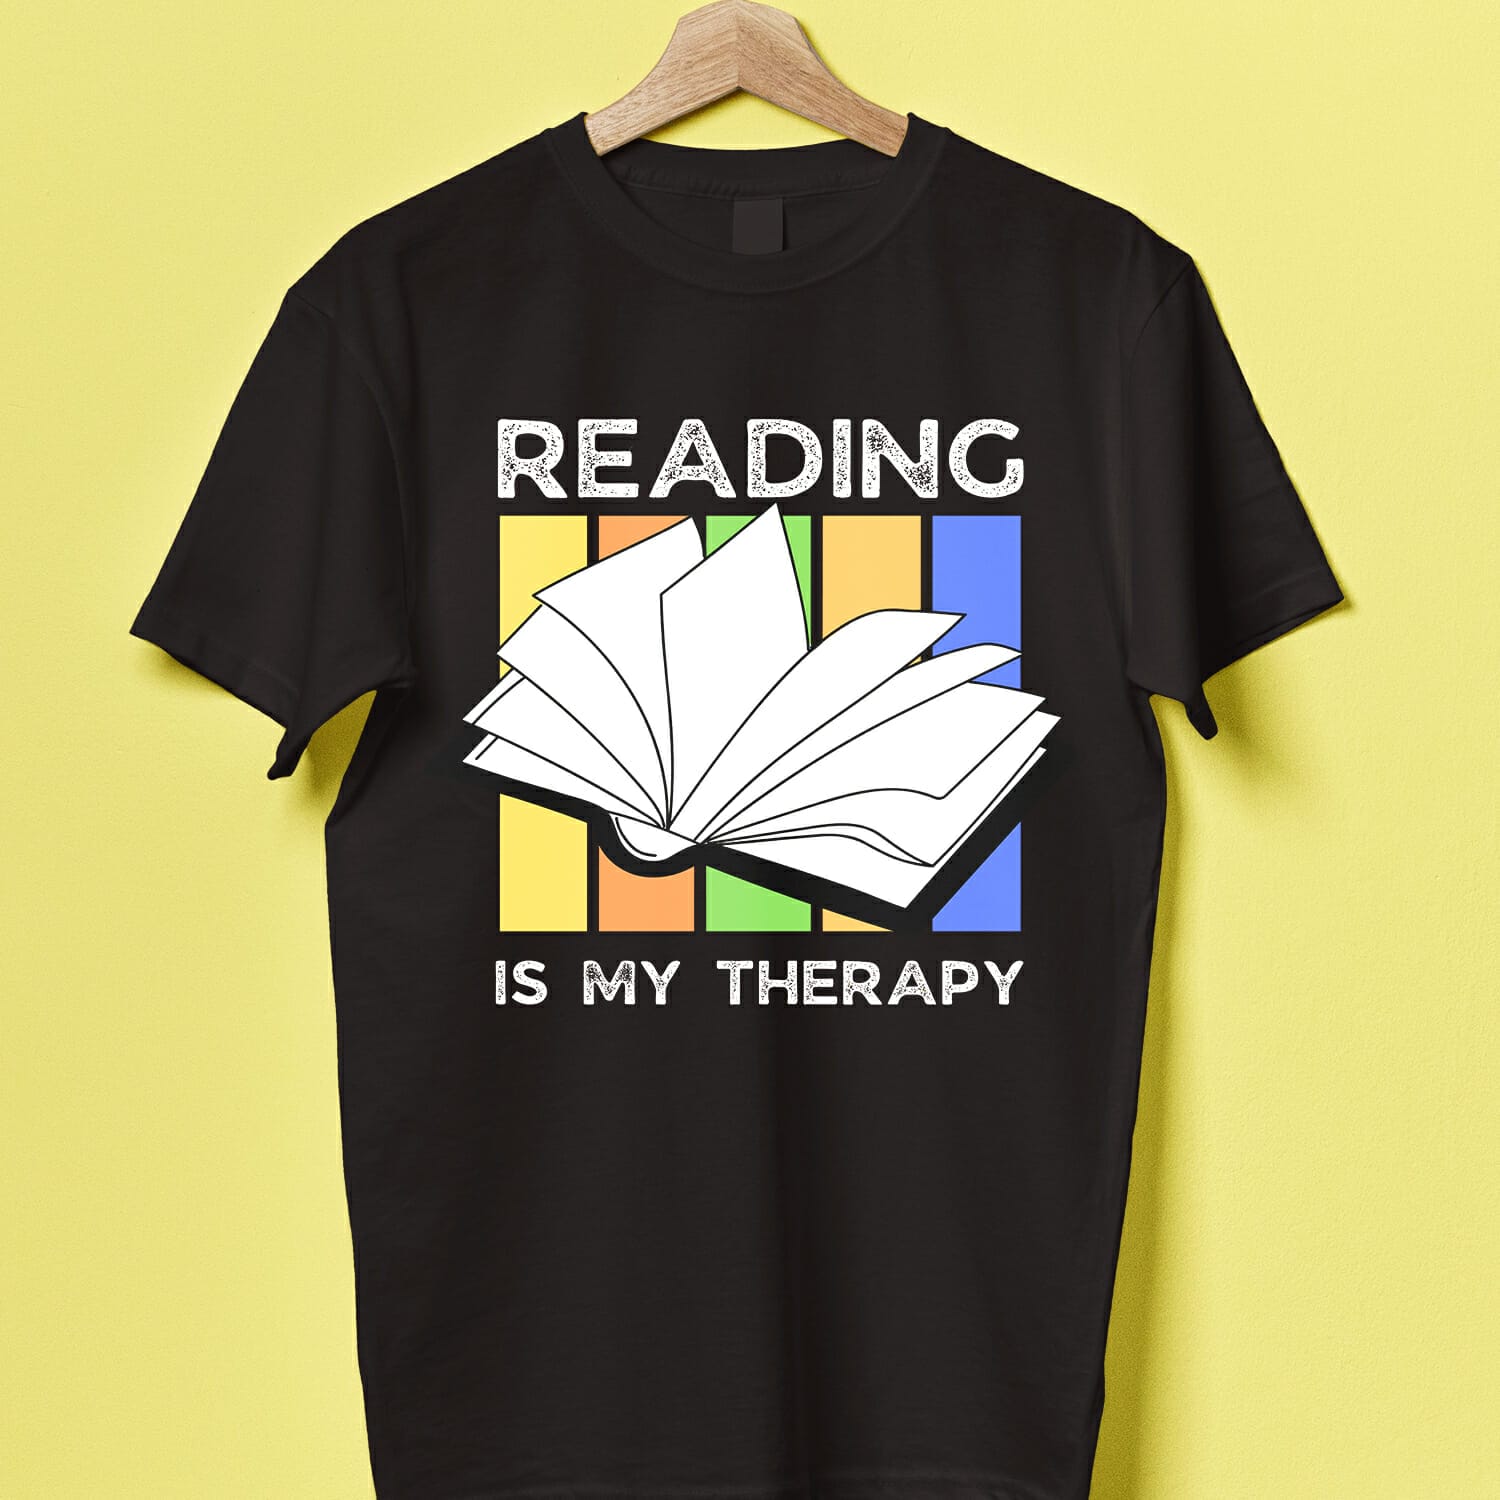 Vintage Reading is my Therapy Design for T-shirt